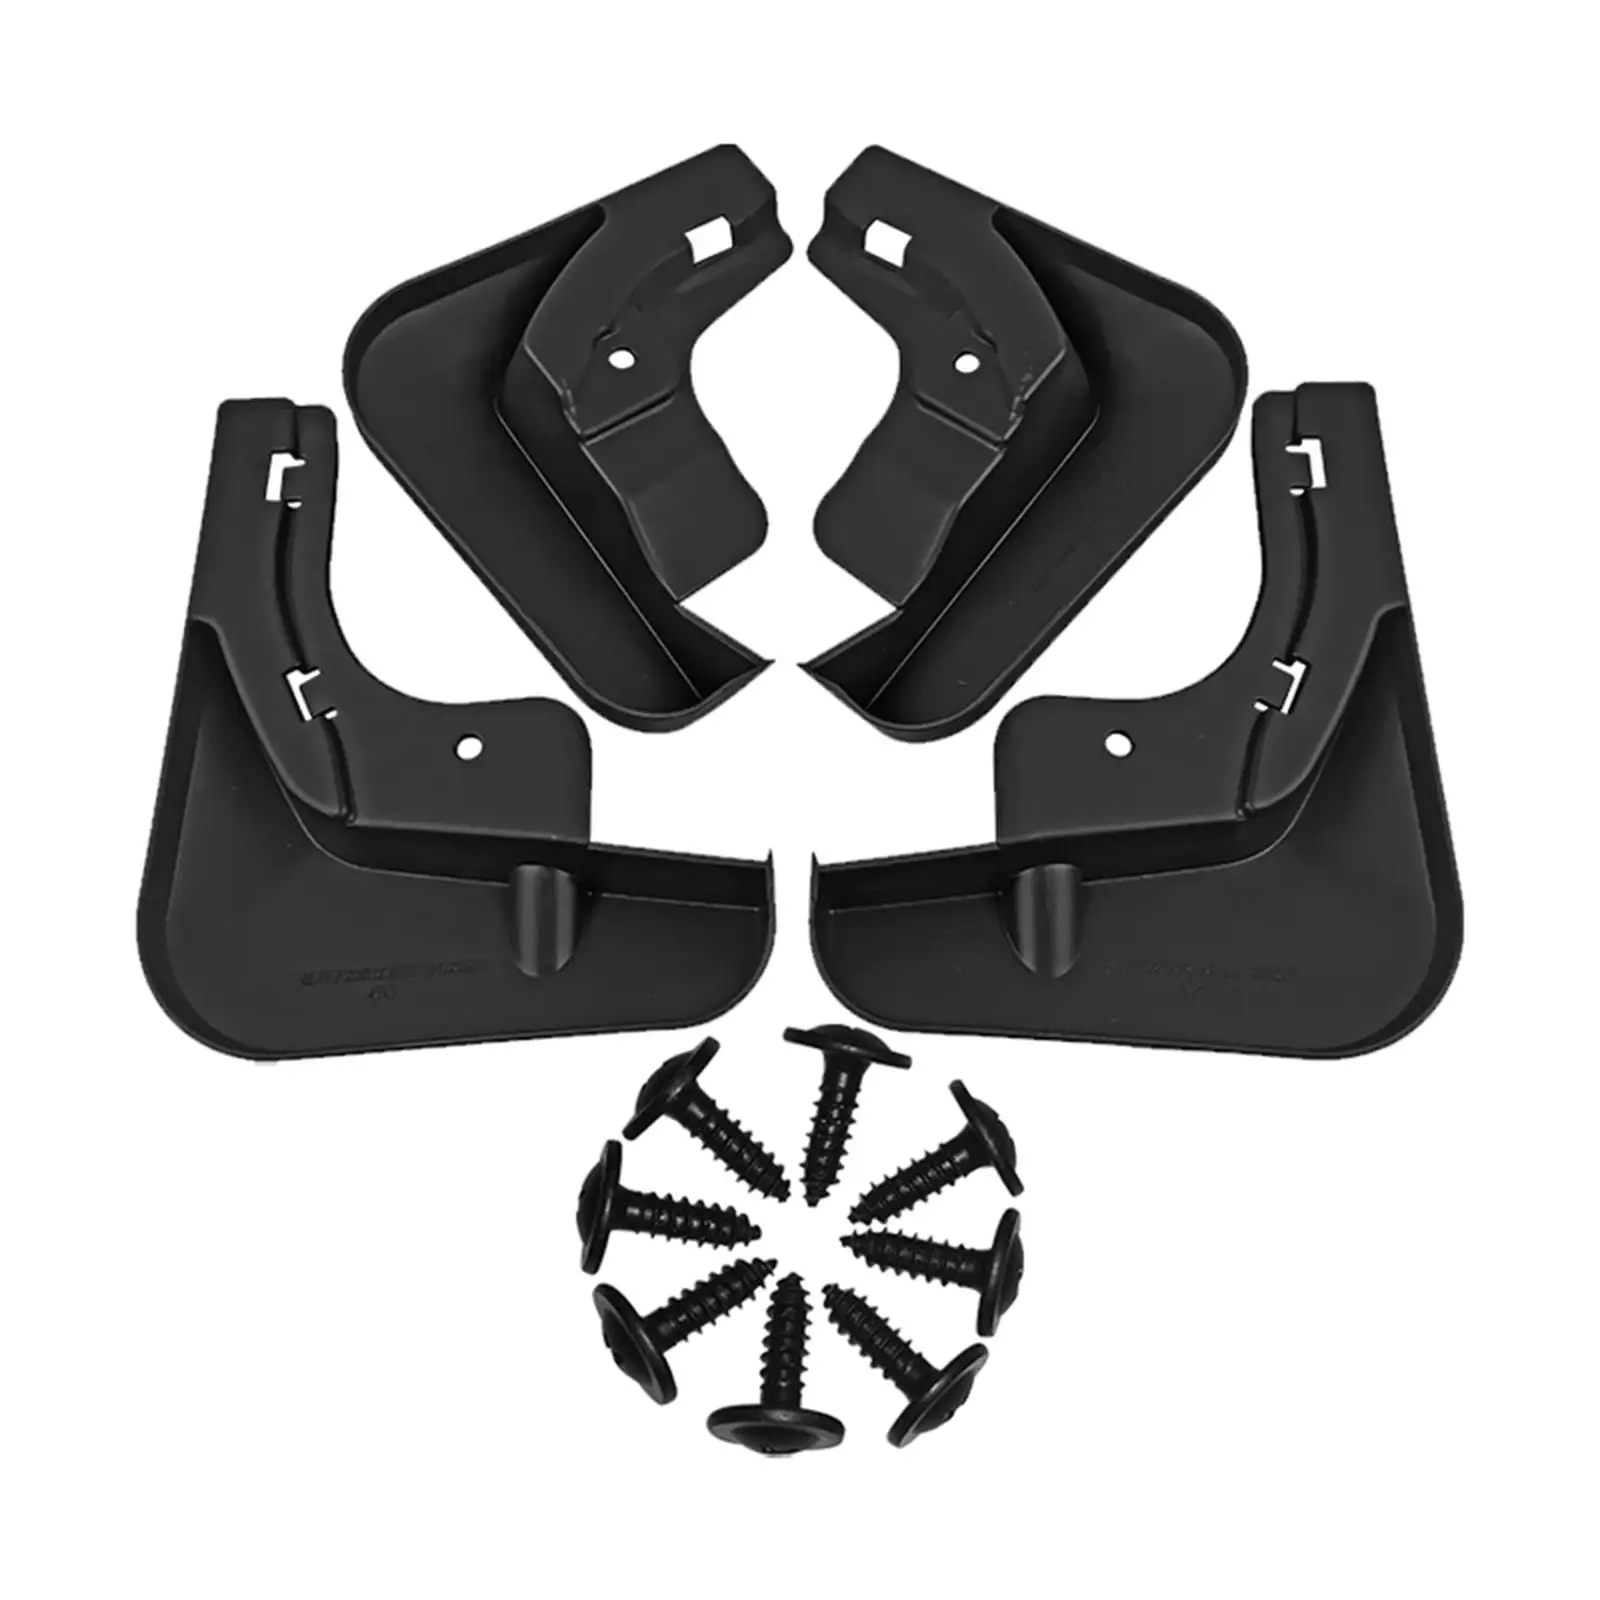 4Pcs Mudguard Accessories Replaces Easy to Install Professional Mud Flaps Black